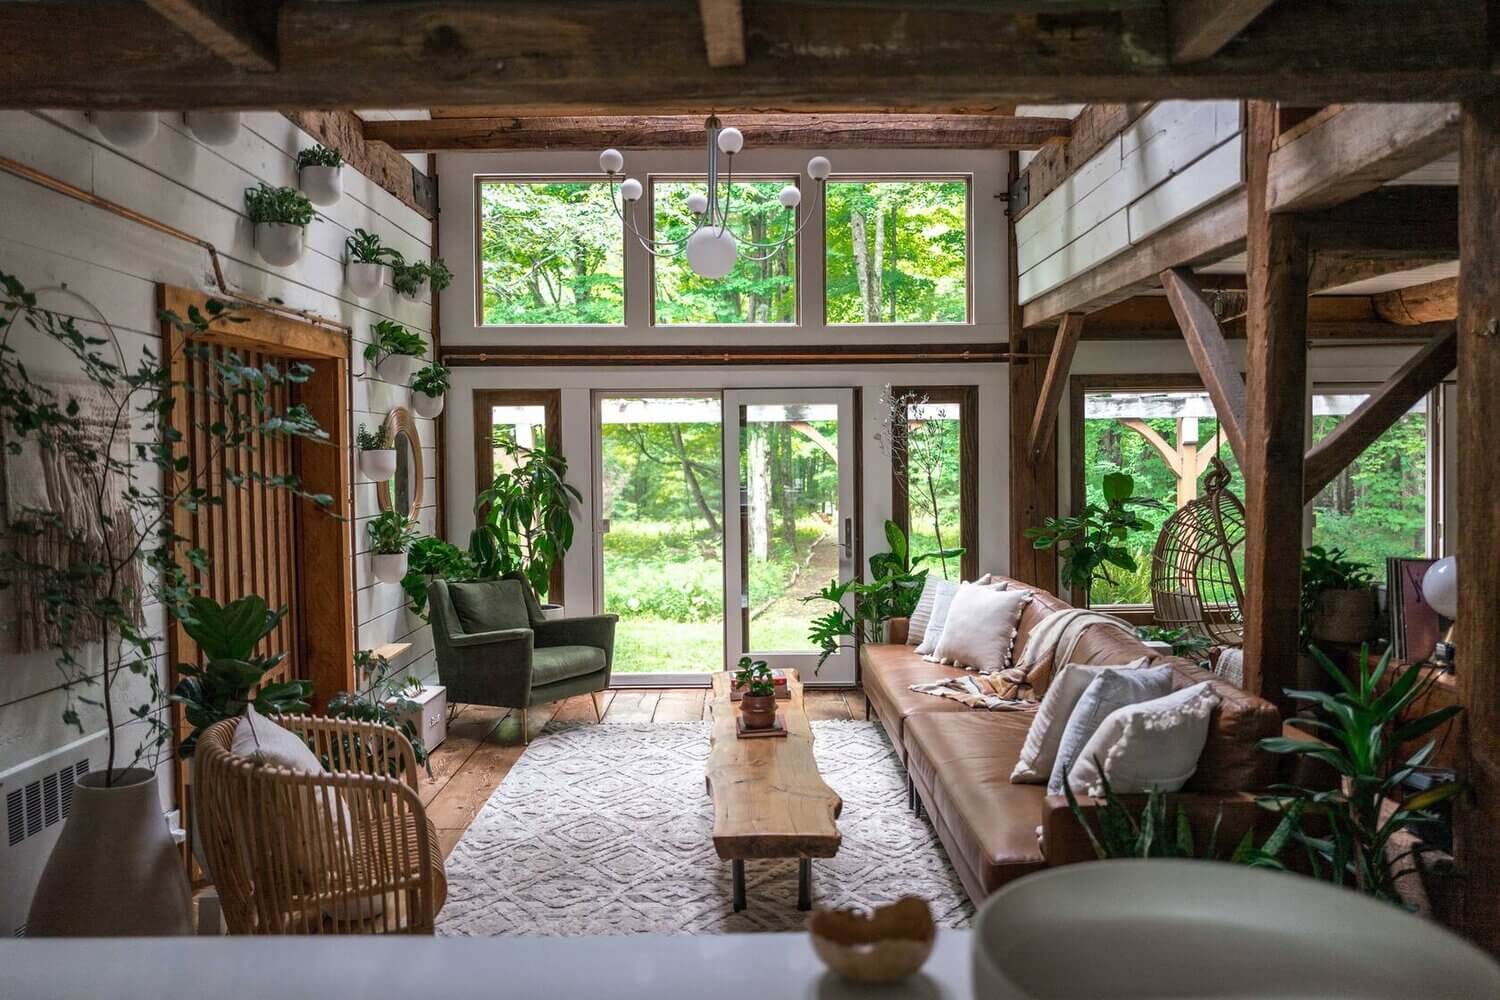 the hunter barnhouse airbnb nordroom The Hunter Barnhouse: A Stylish Slow Living Airbnb Surrounded by Nature